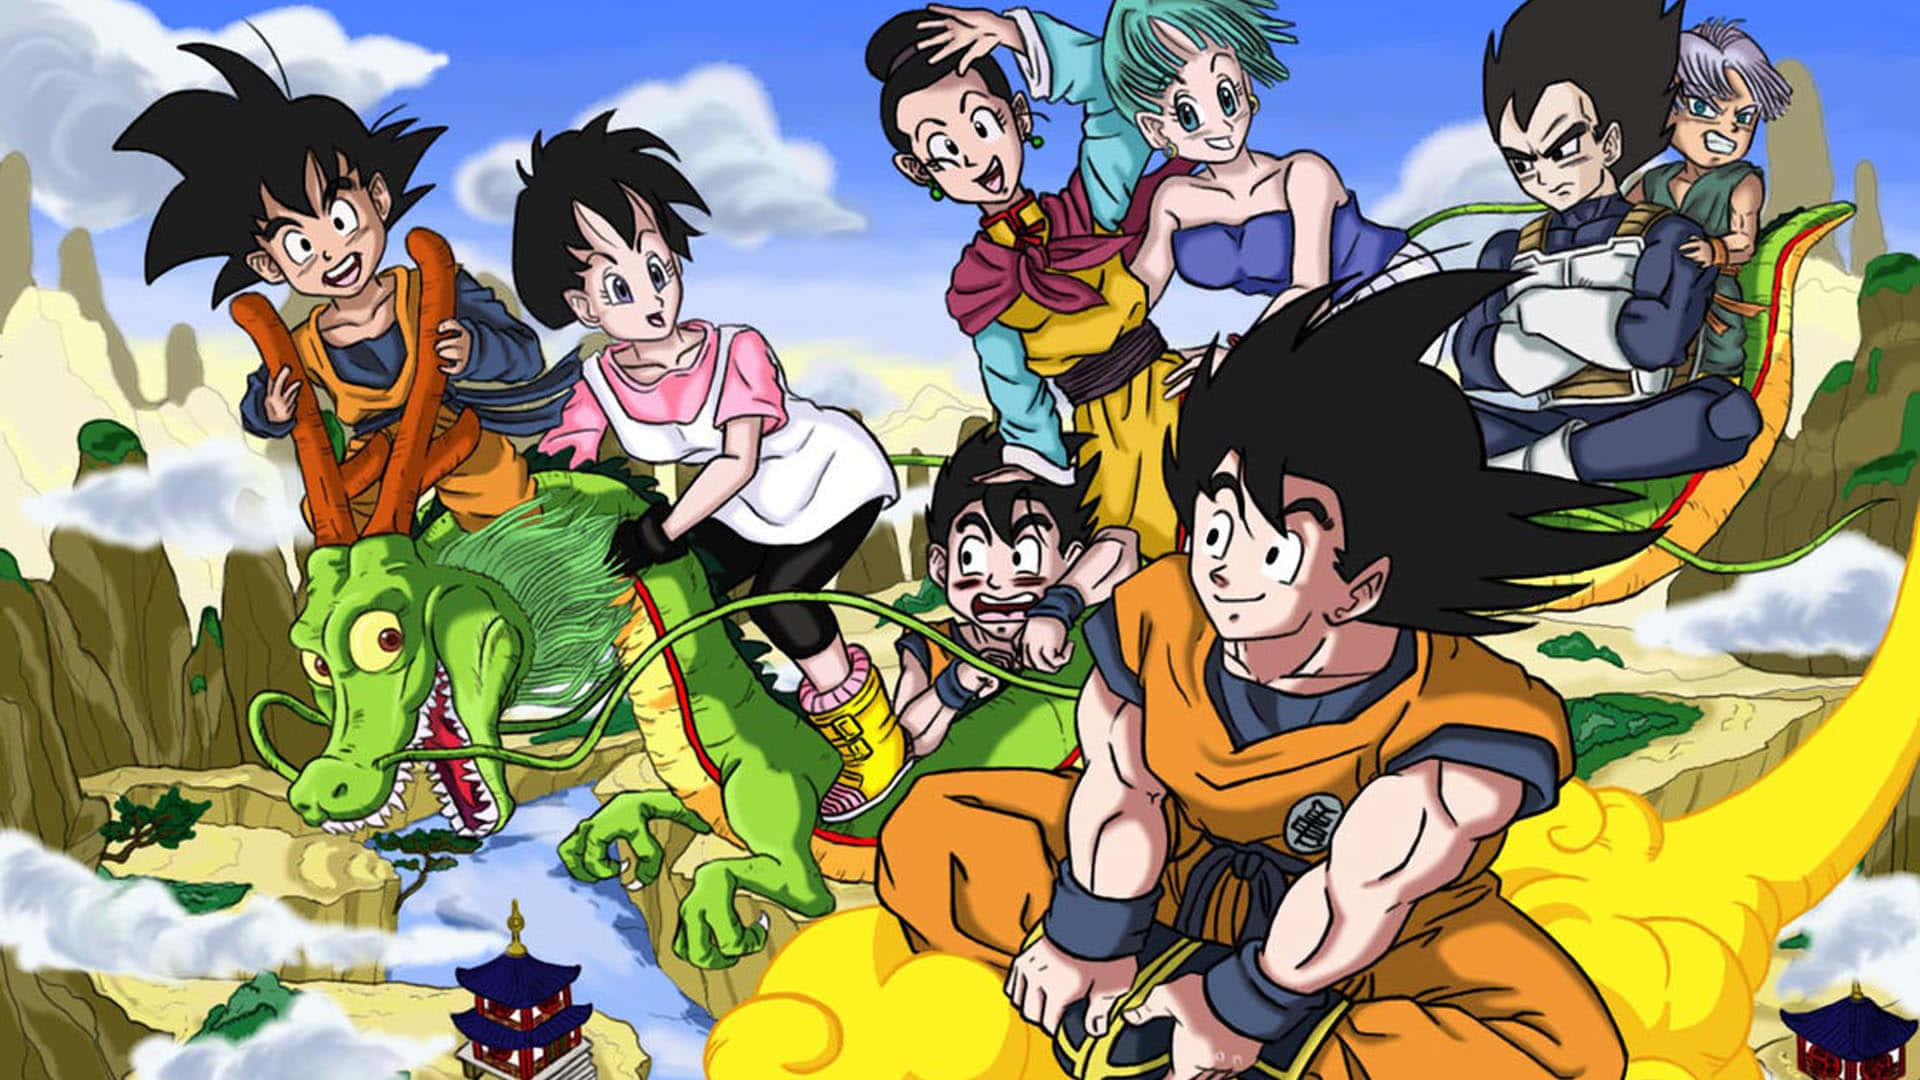 "Goku and Chichi, The Perfect Couple" Wallpaper